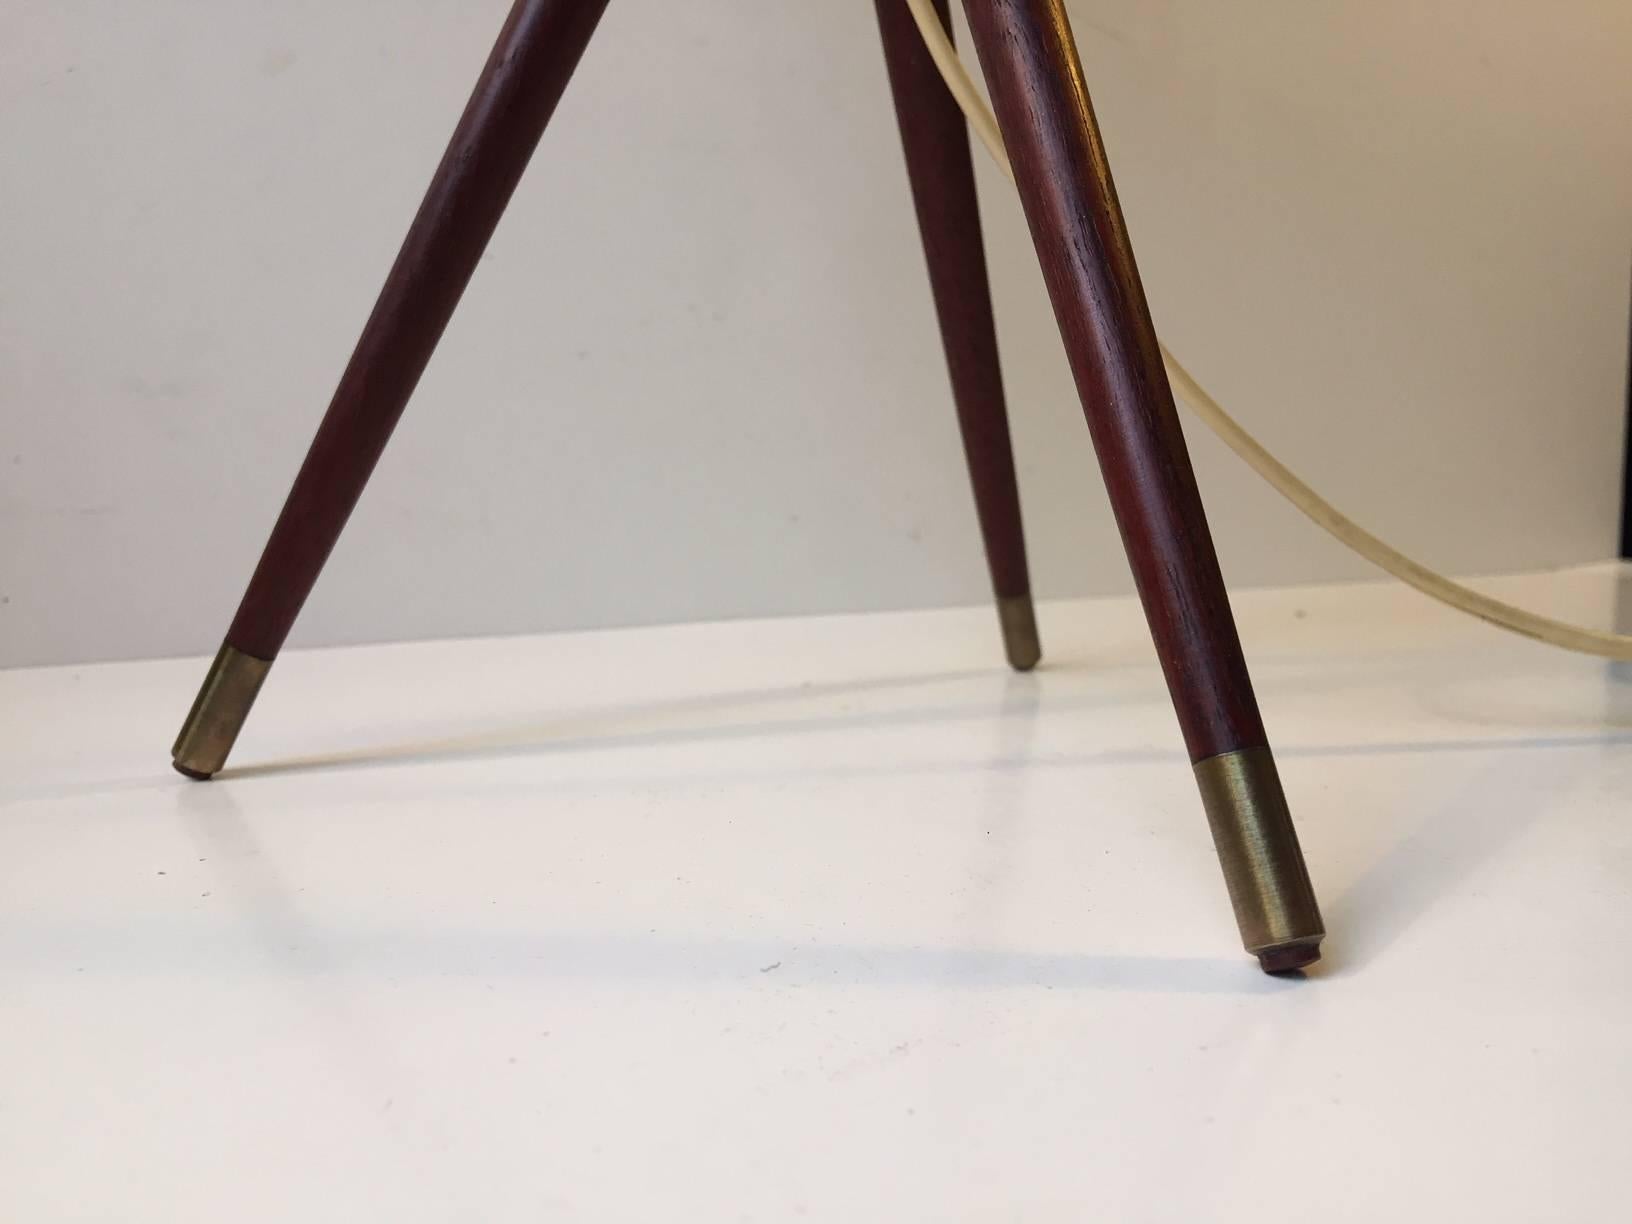 Danish Sputnik Table Lamp in Teak, Brass and Cut Glass, 1950s In Good Condition For Sale In Esbjerg, DK